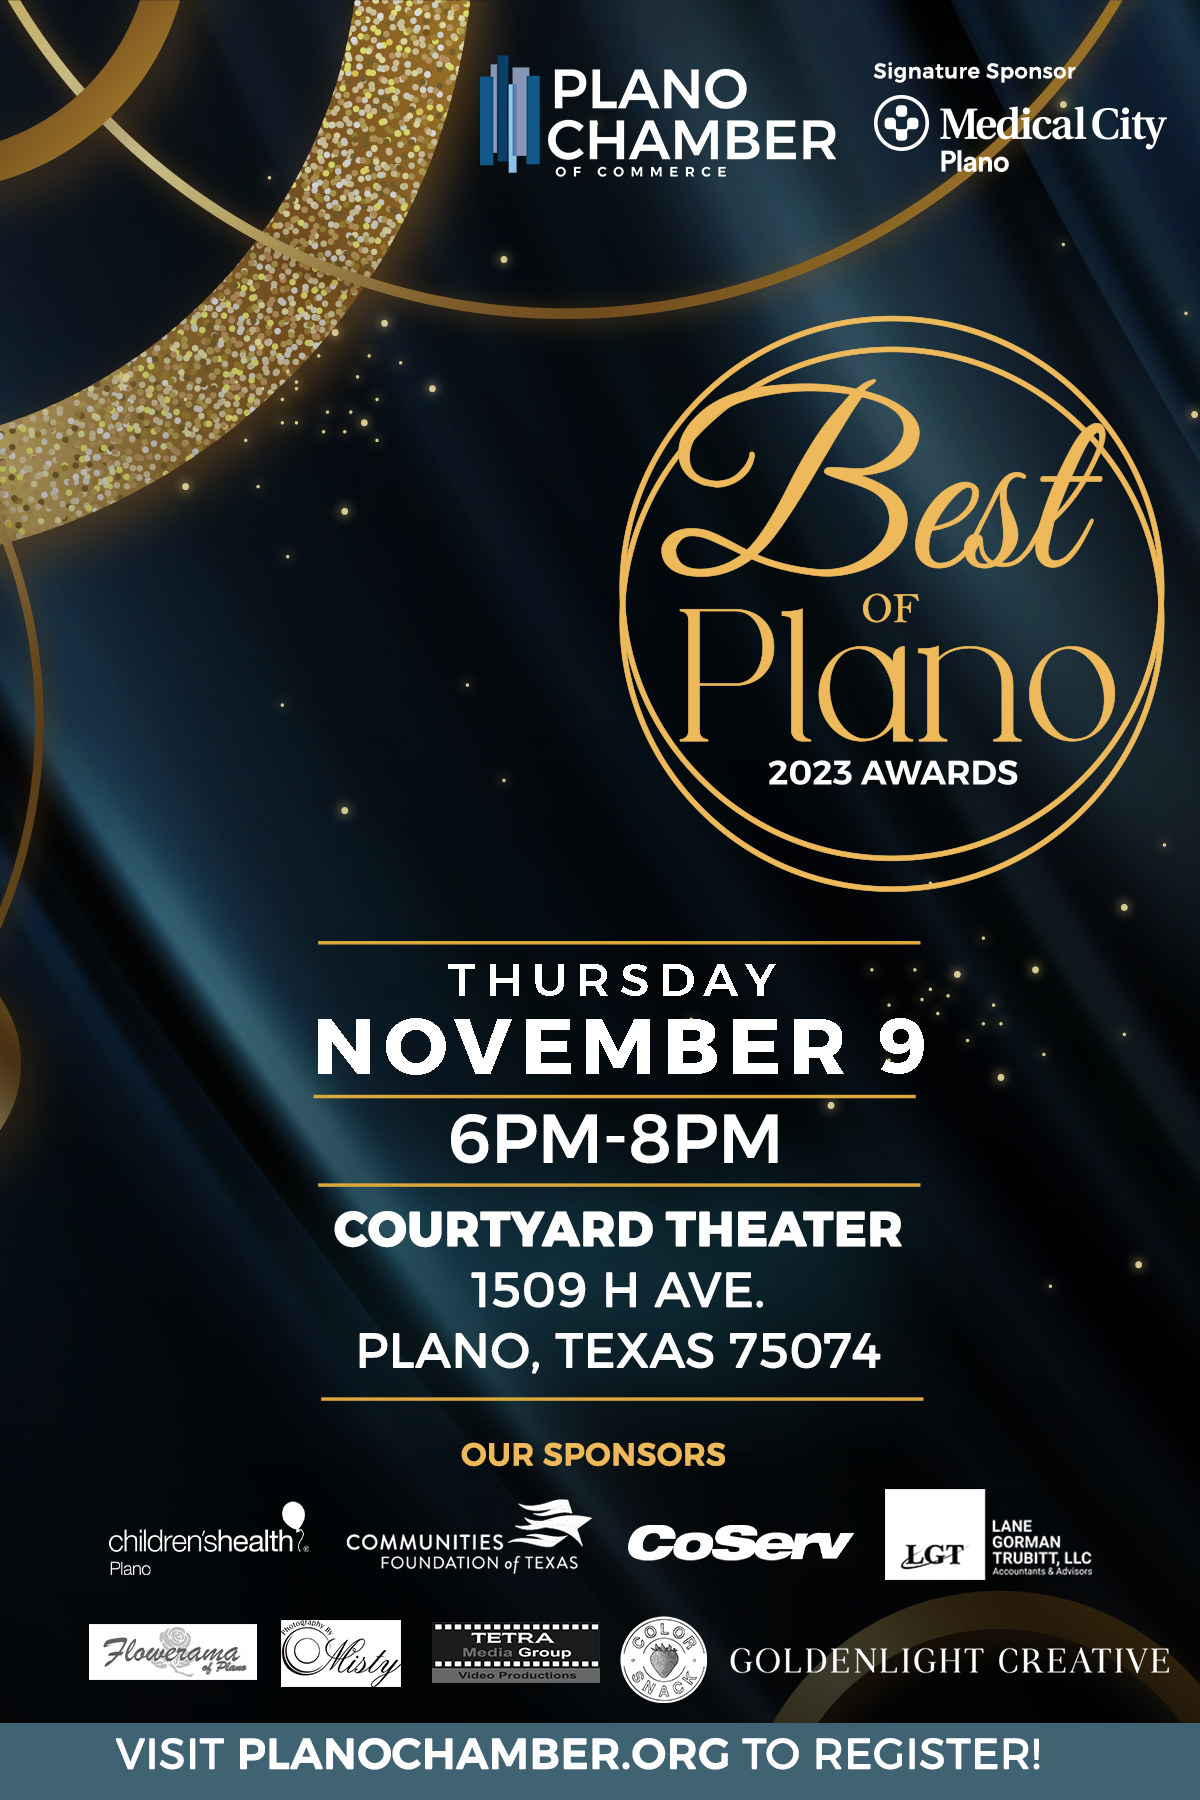 Plano Chamber of Commerce- Best of Plano